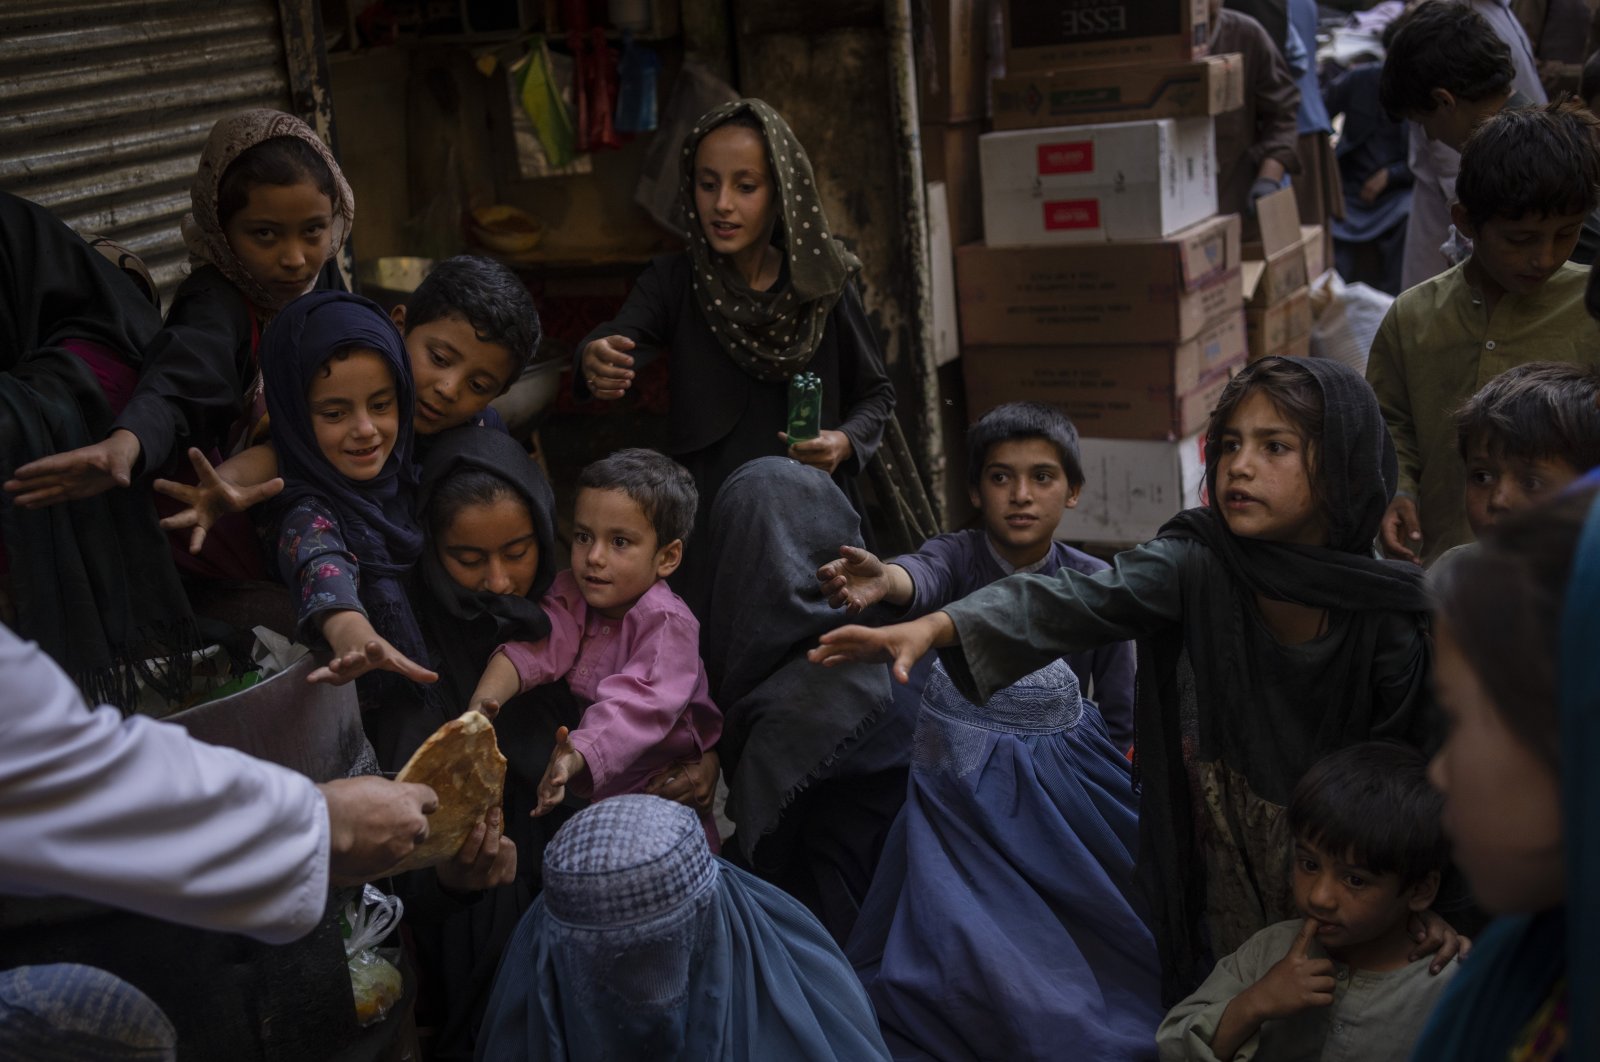 Afghan women and children receive bread donations in Kabul's Old City, Afghanistan, Sept. 16, 2021. (AP Photo)